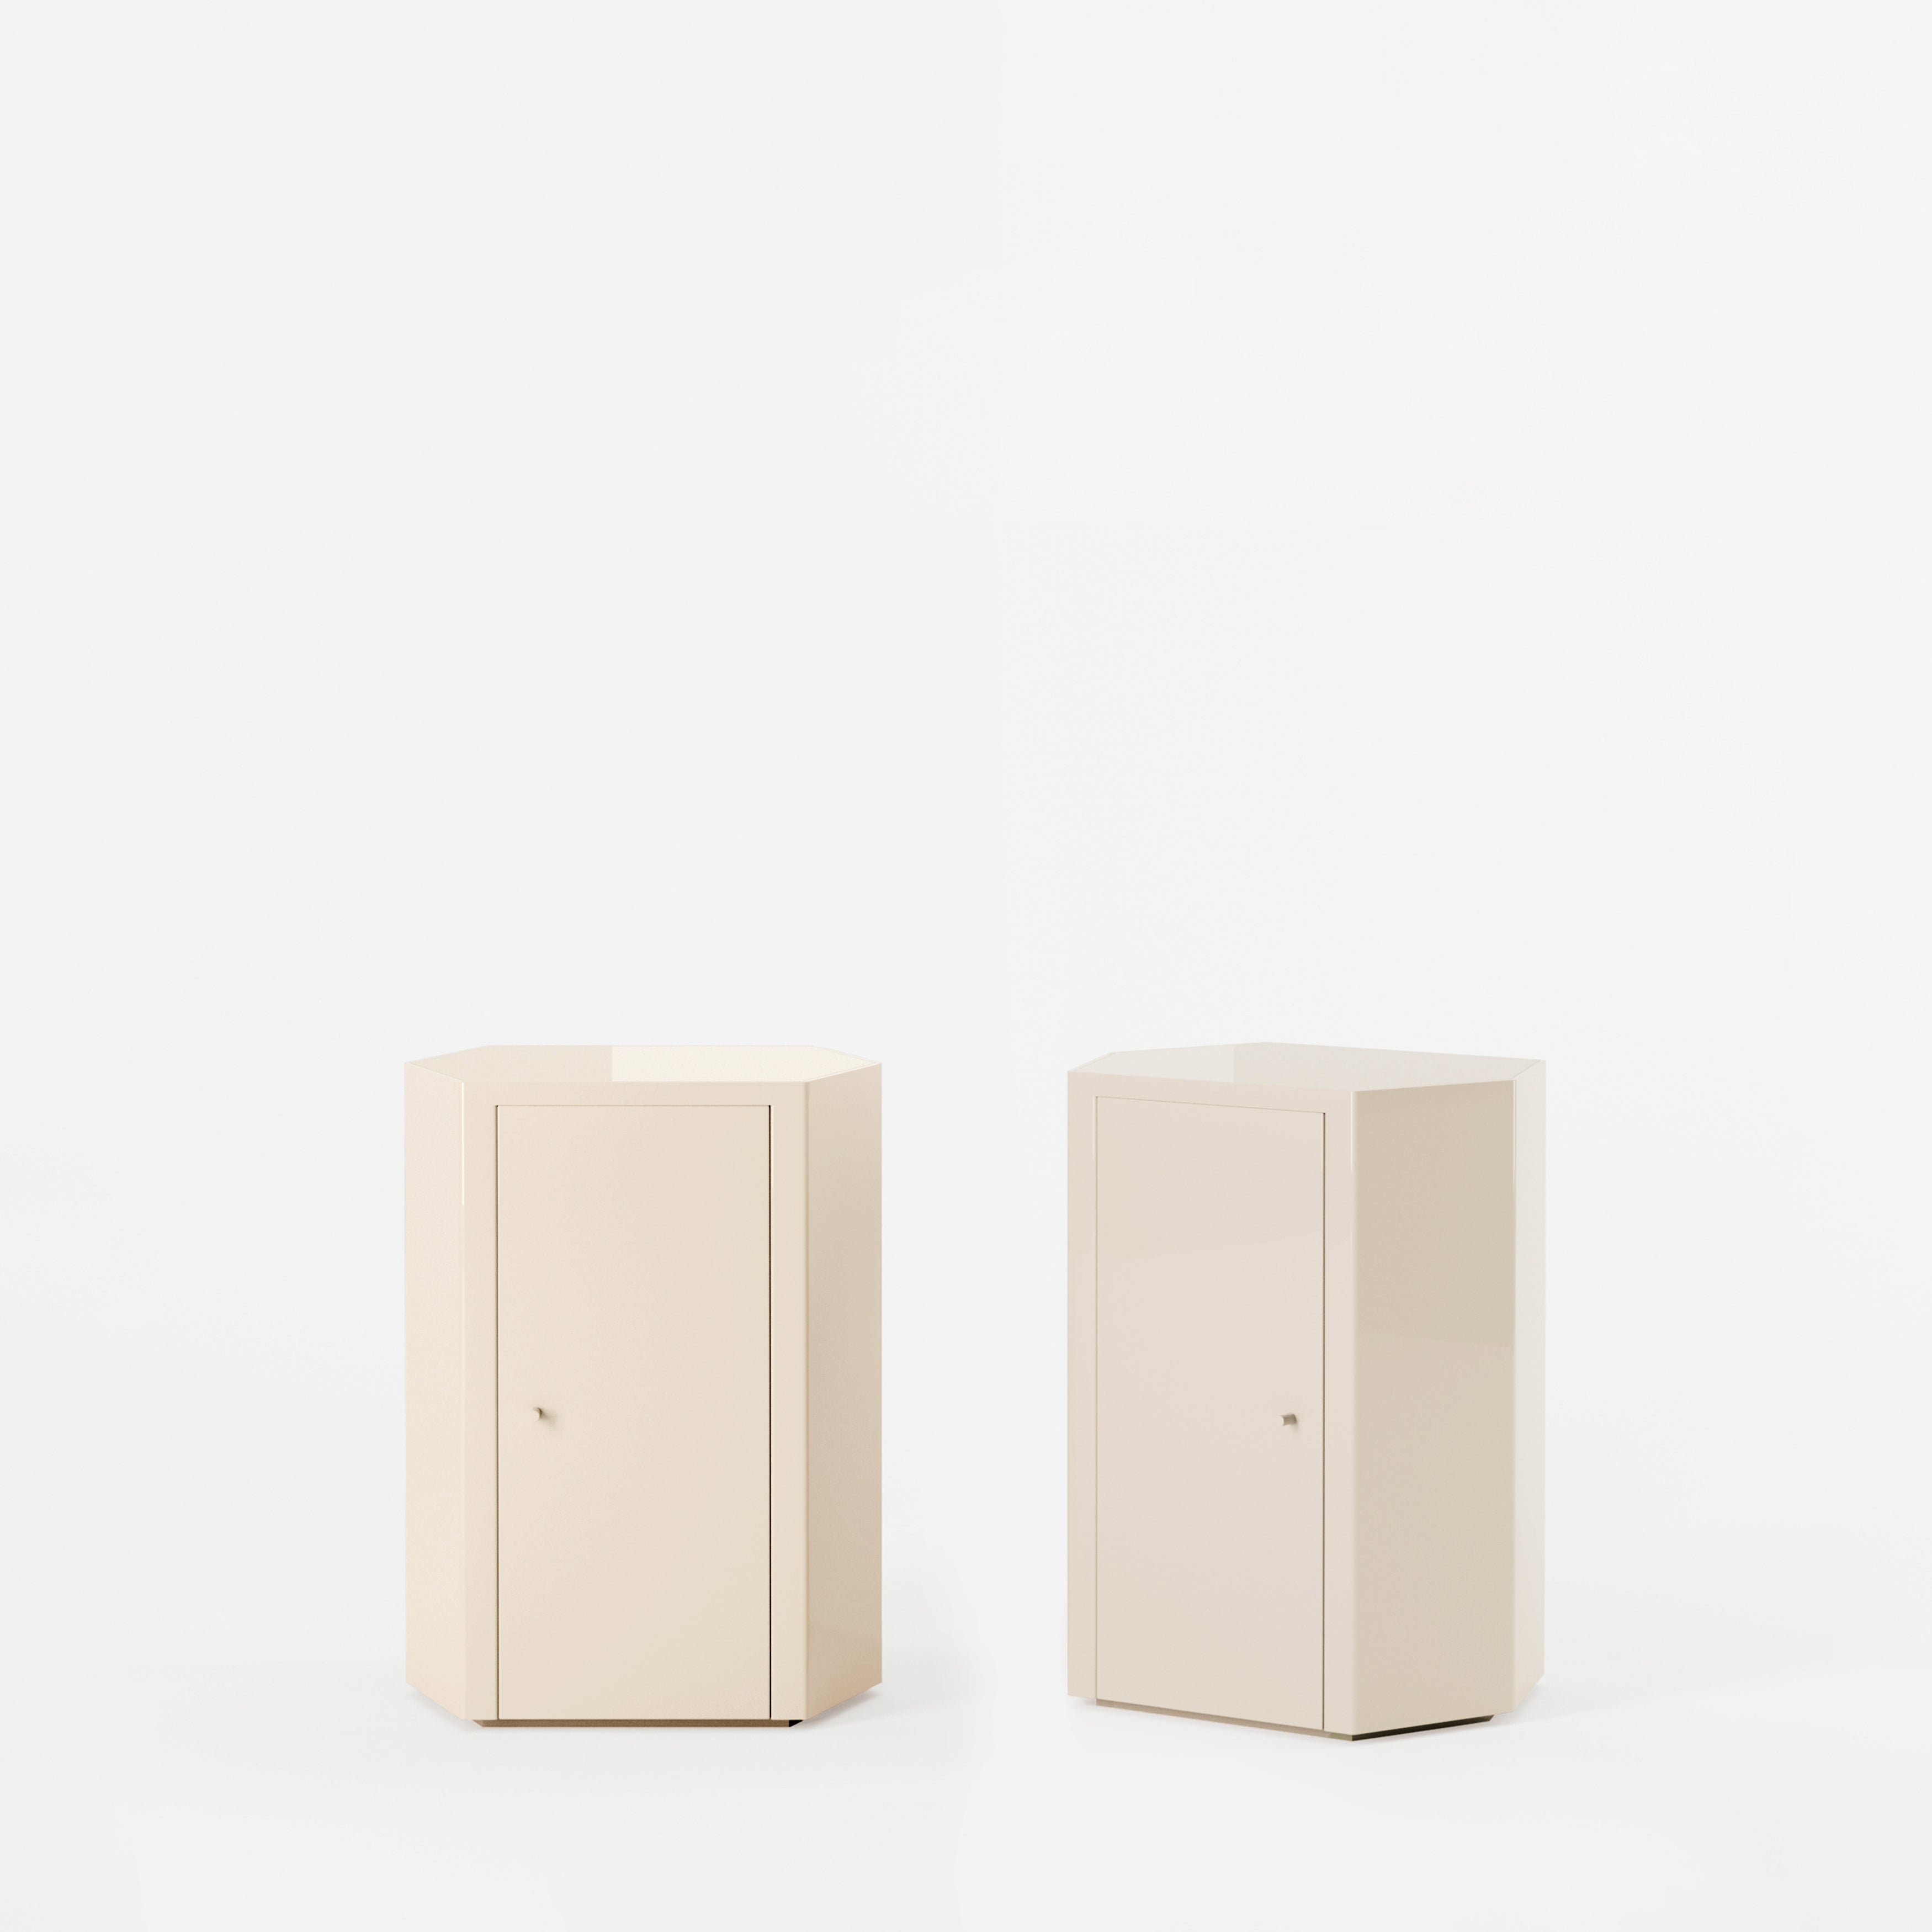 Pair of Park Night Stands in Butter Cream Lacquer by Yaniv Chen for Lemon For Sale